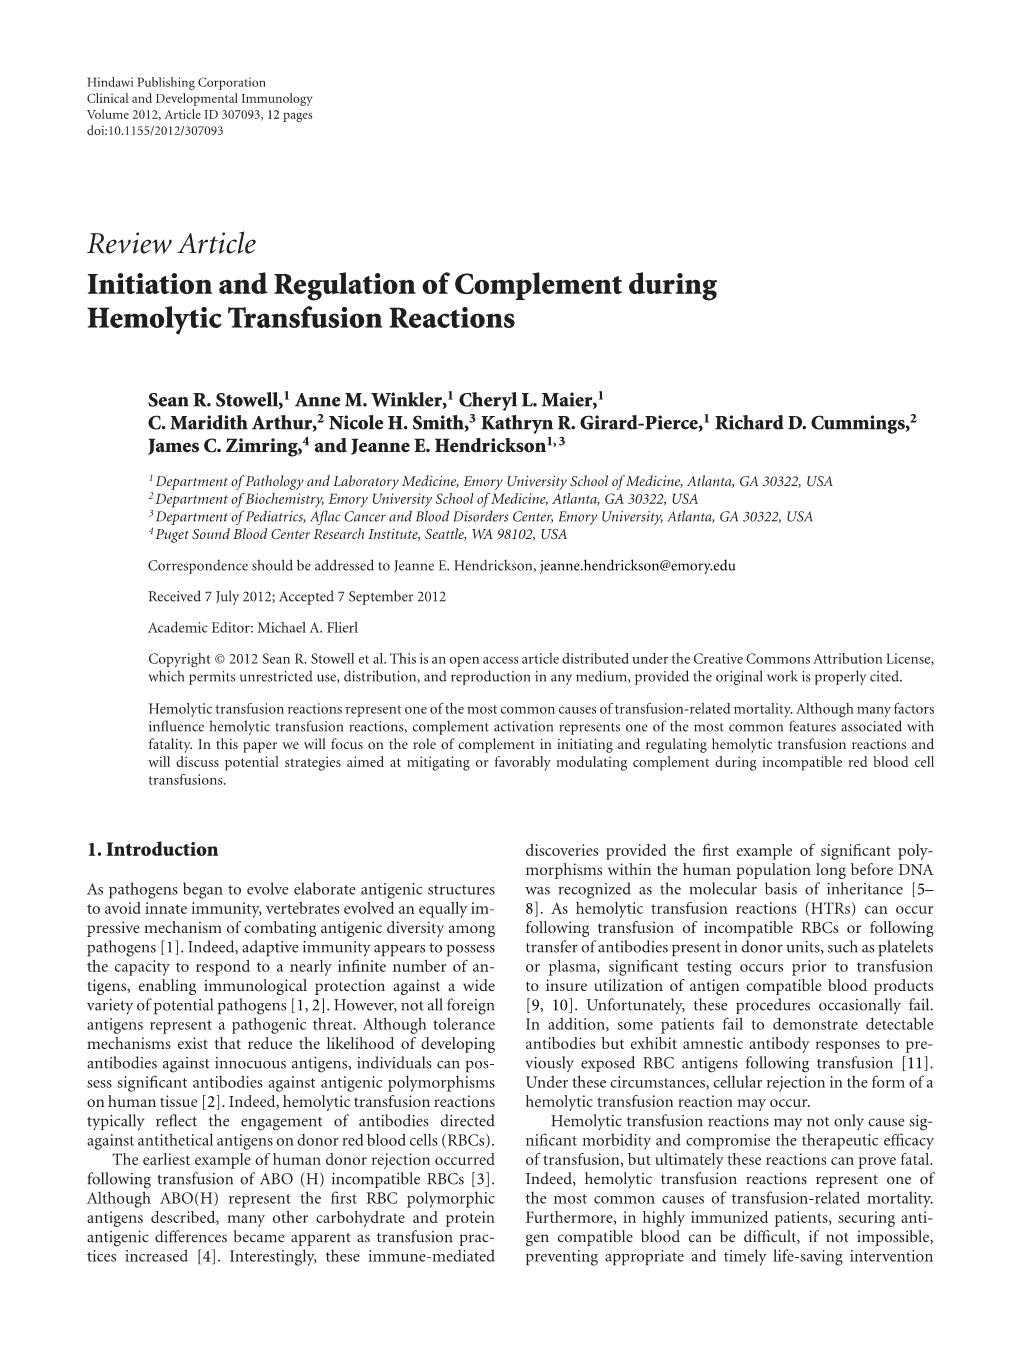 Initiation and Regulation of Complement During Hemolytic Transfusion Reactions